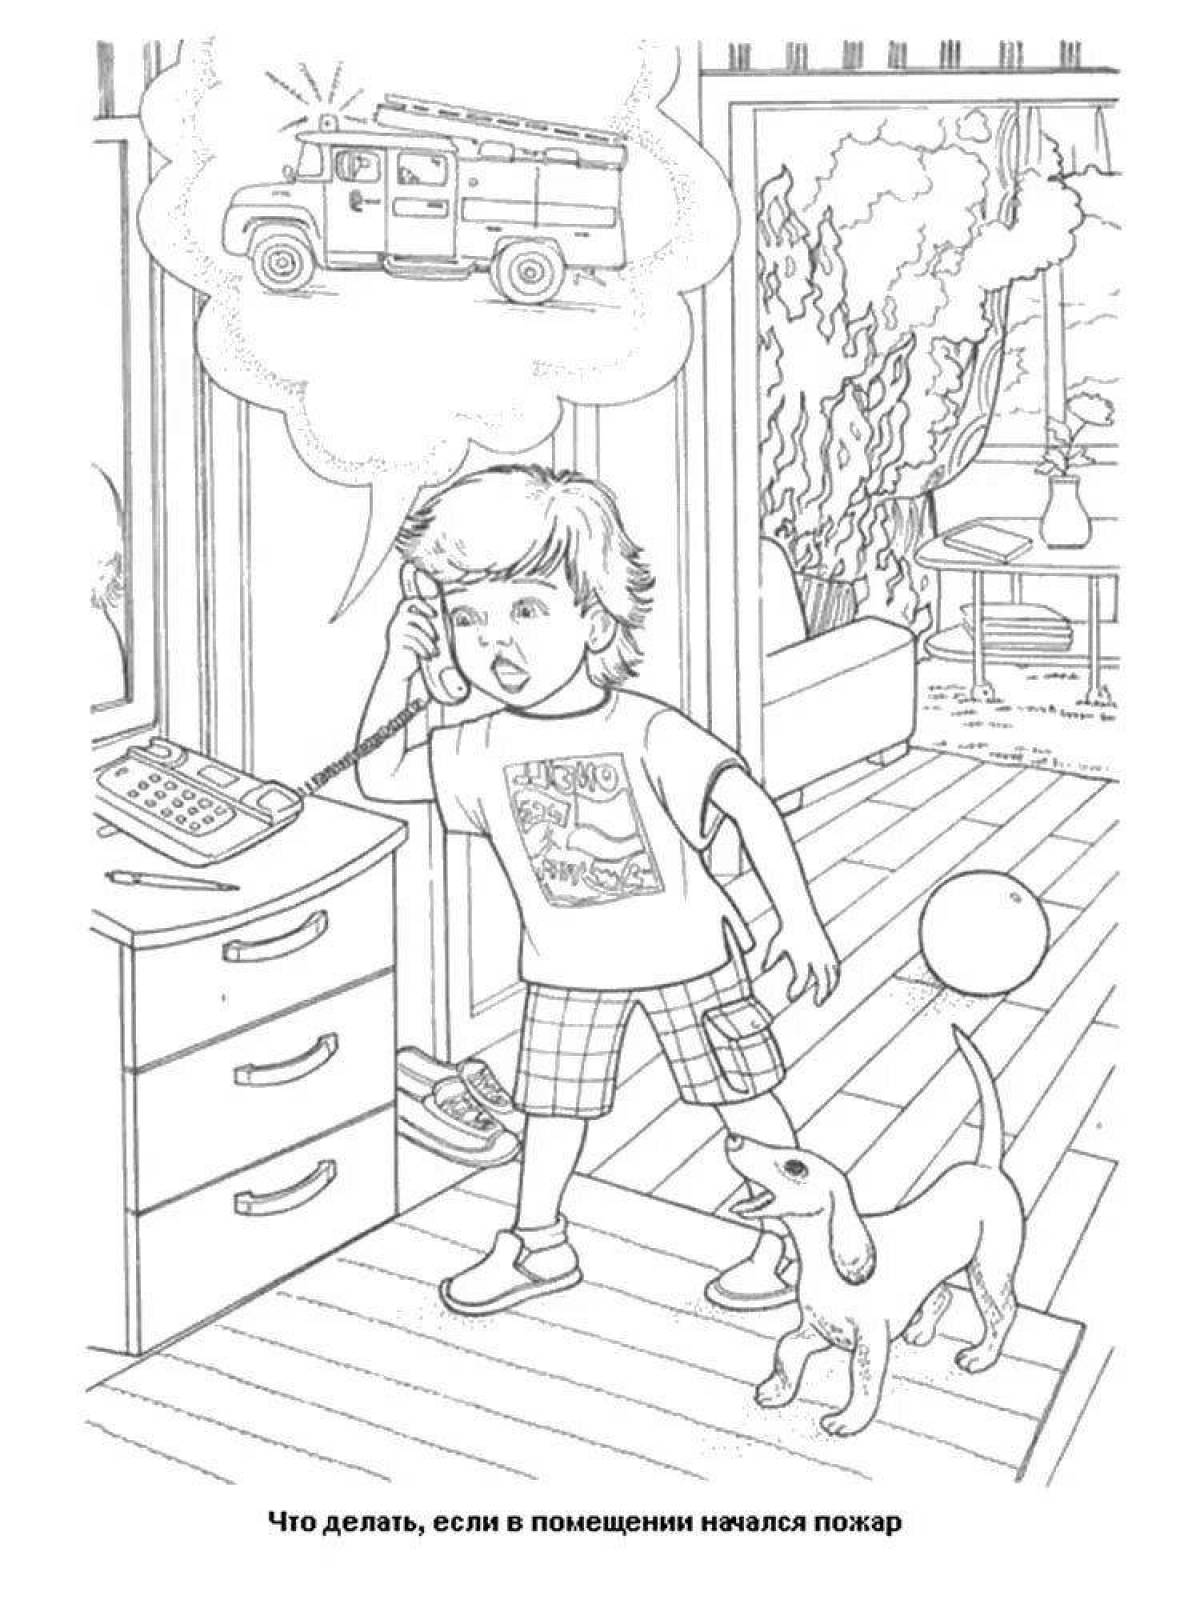 Child safety bright coloring page